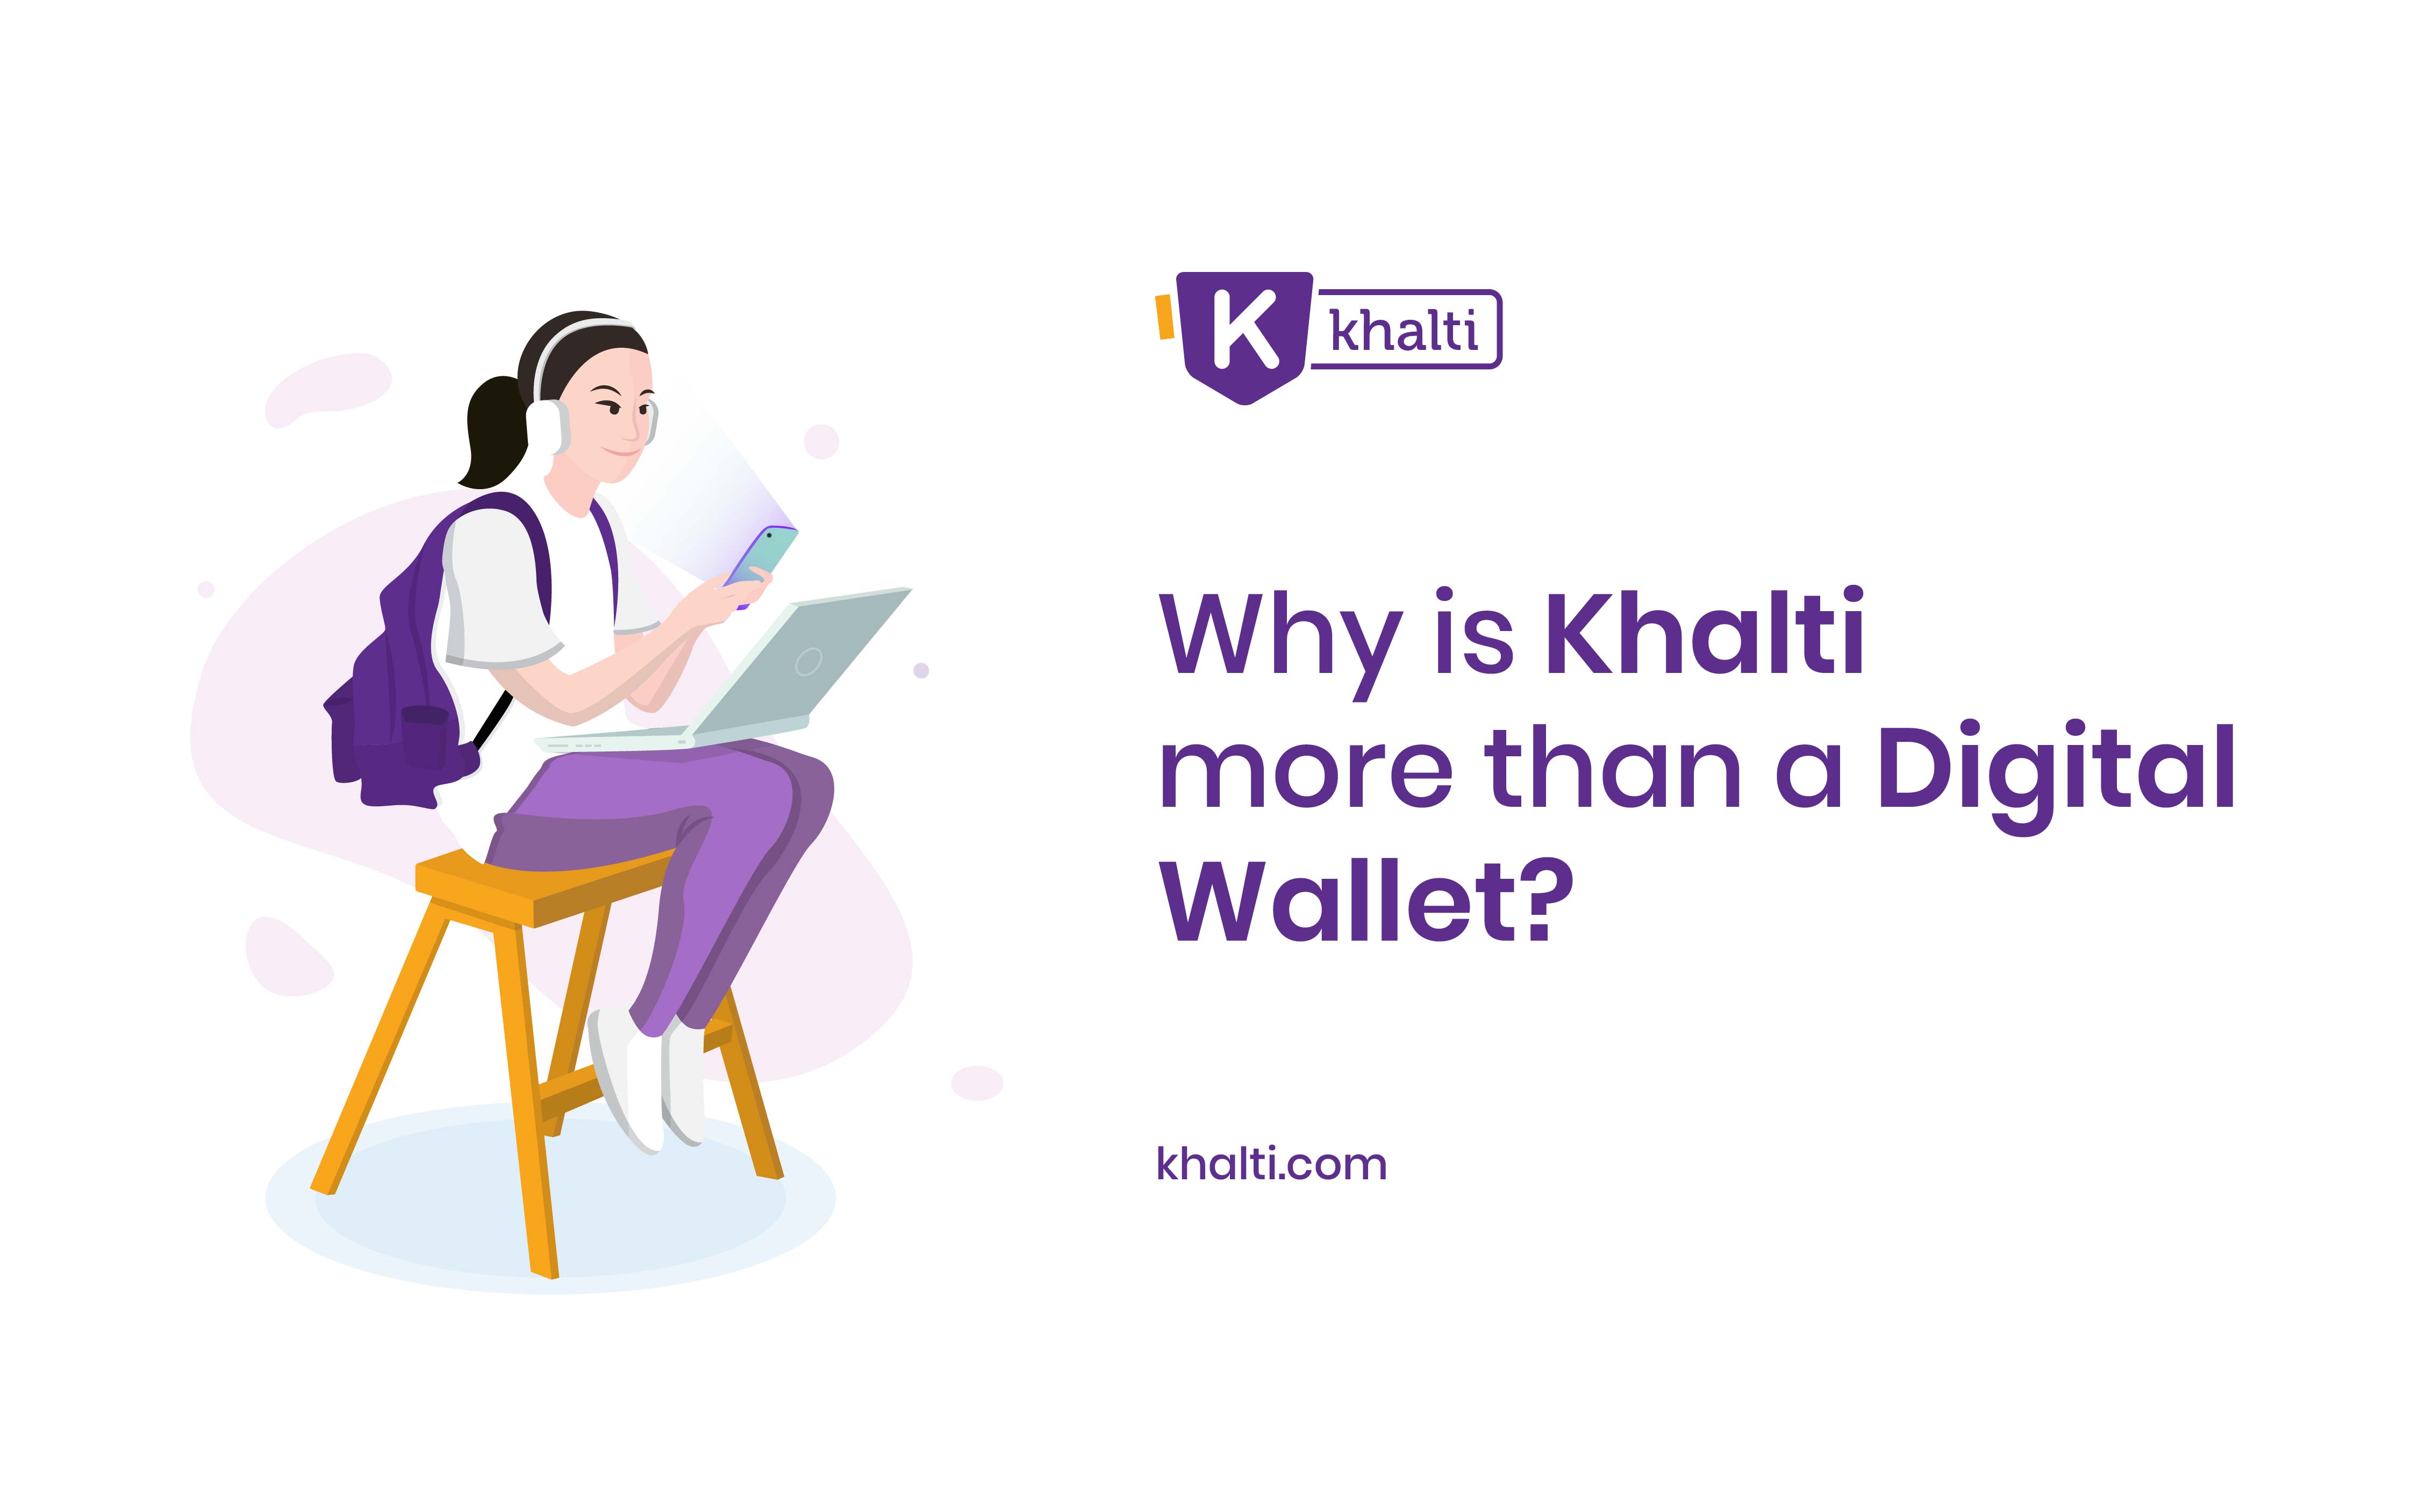 Why is Khalti more than a Digital Wallet?